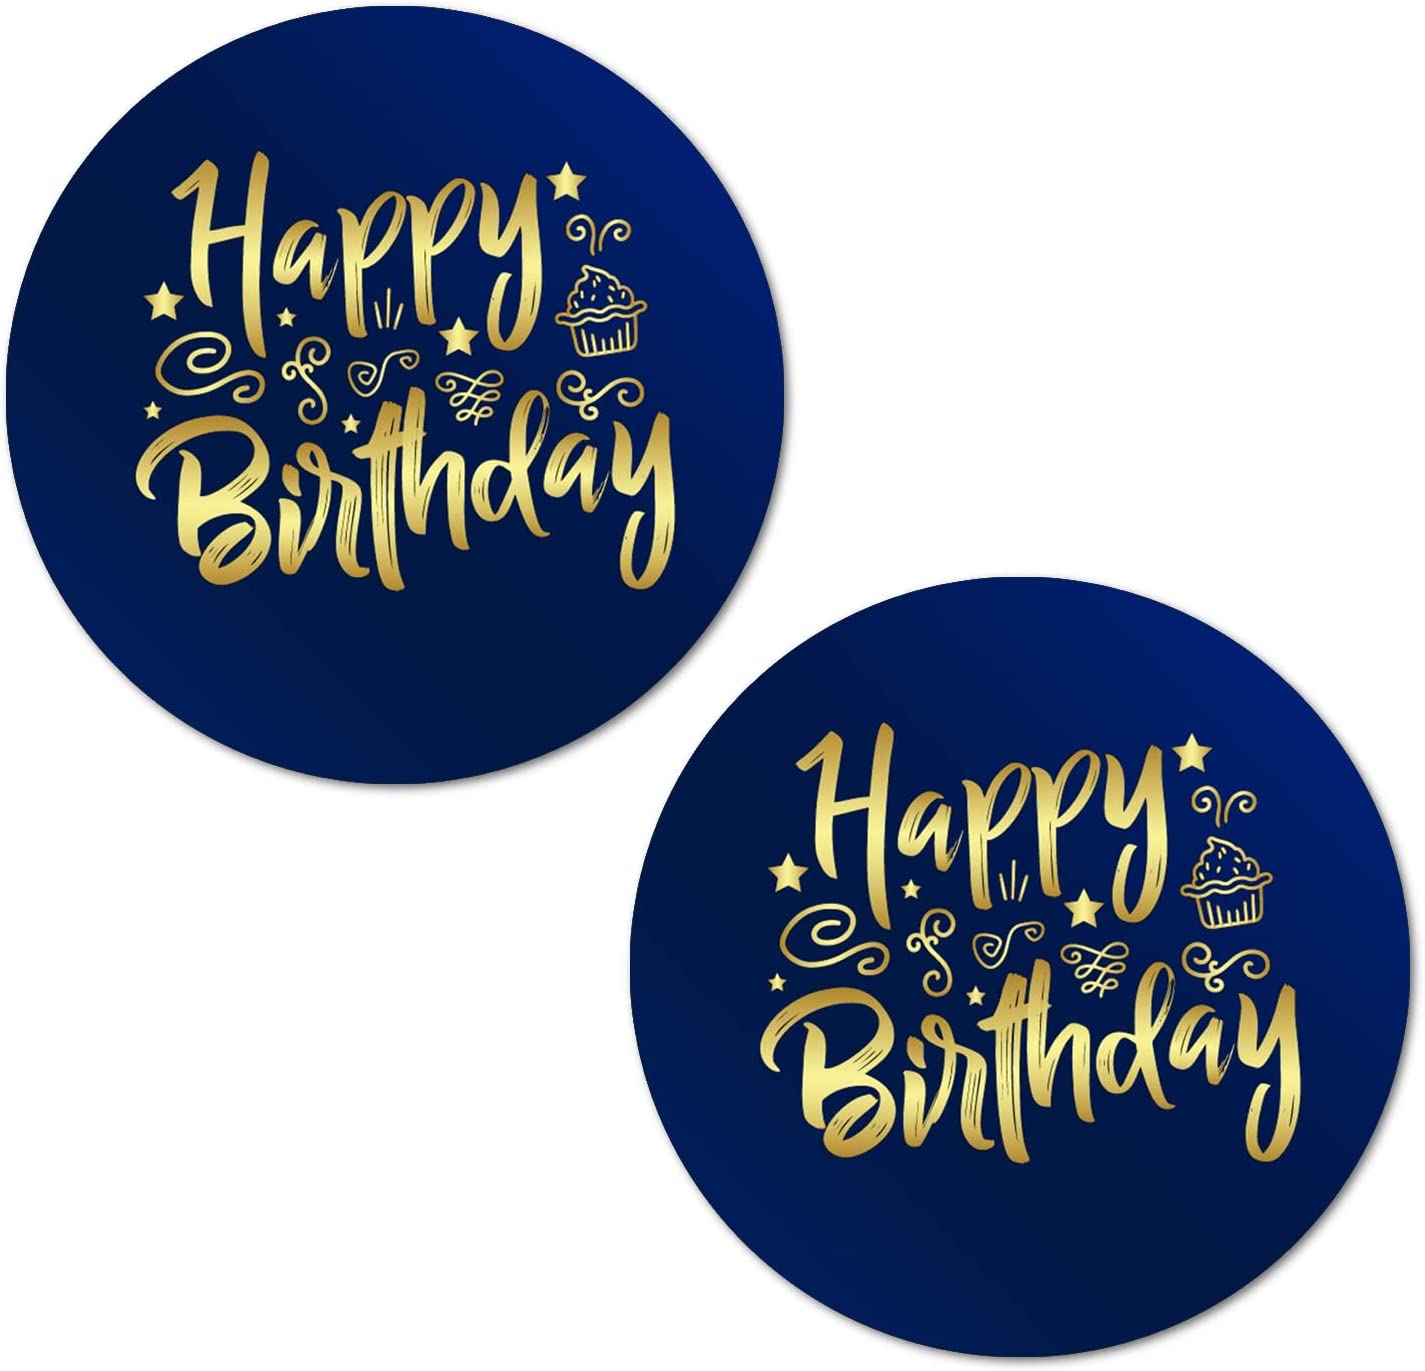 40 Happy Birthday Stickers, 2 Inch Big Round Glossy Labels, Great for  Birthday Party, Gift Box, Gift Bag, Party Favors Décor, Tags, Games and  Supplies